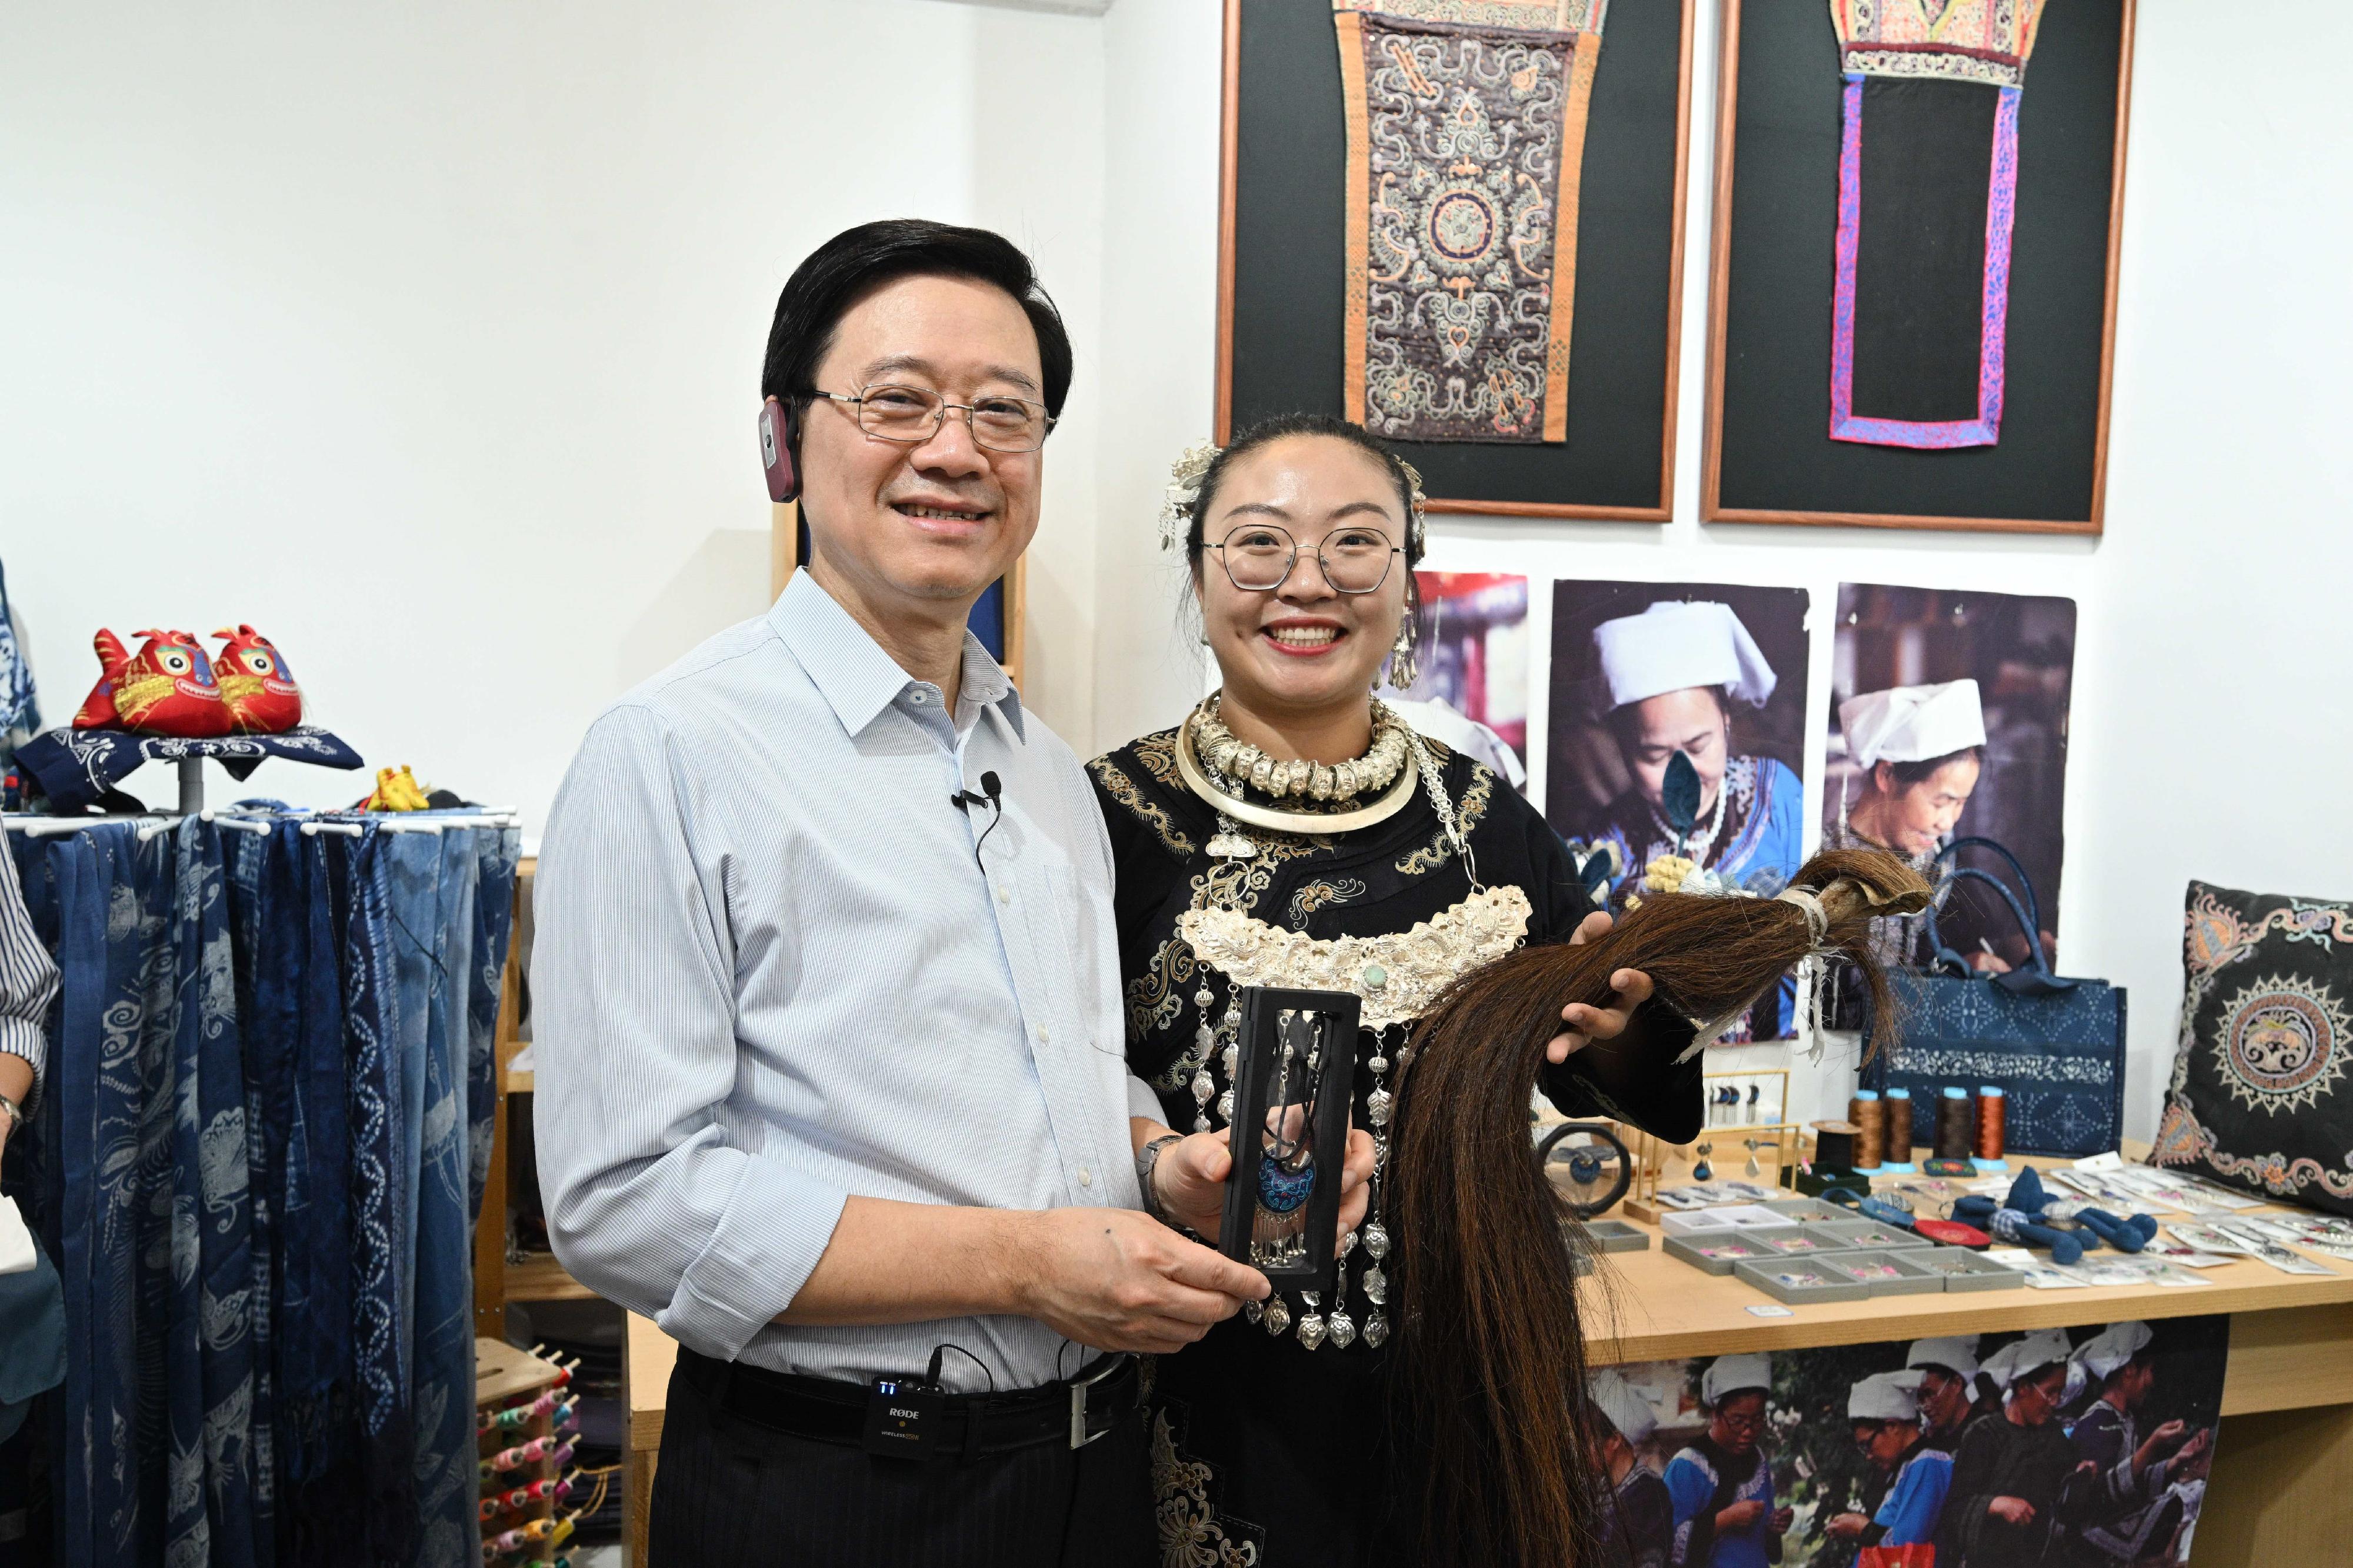 The Chief Executive, Mr John Lee, led a delegation to start his visit programme in Guiyang, today (July 6). Photo shows Mr Lee (left) listening to an introduction of the Guizhou Shuixian Horsetail Embroidery at the Qingyun Market.